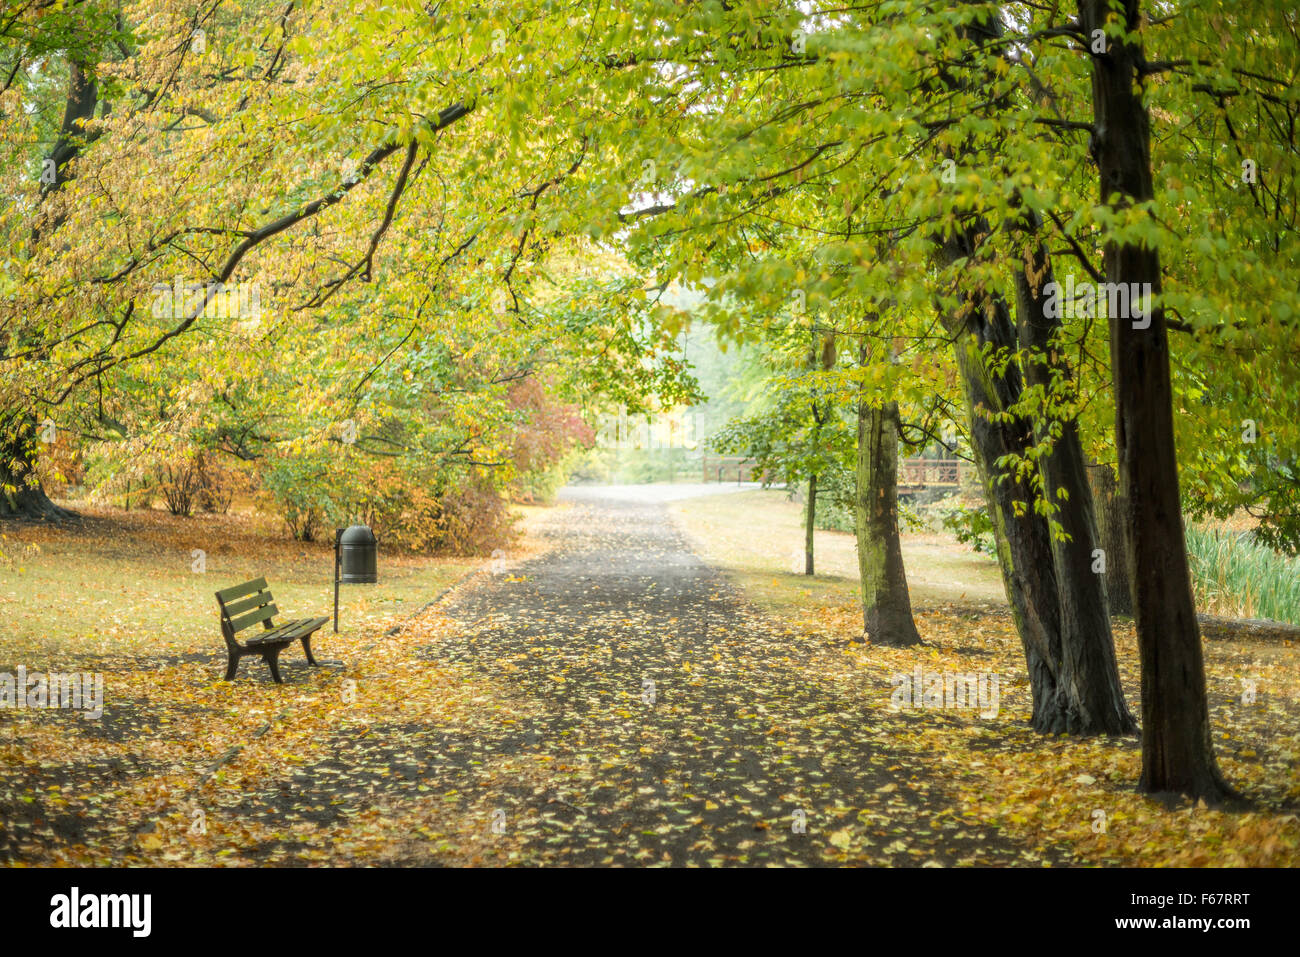 Quiet park lane covered with fallen autumn leaves Stock Photo